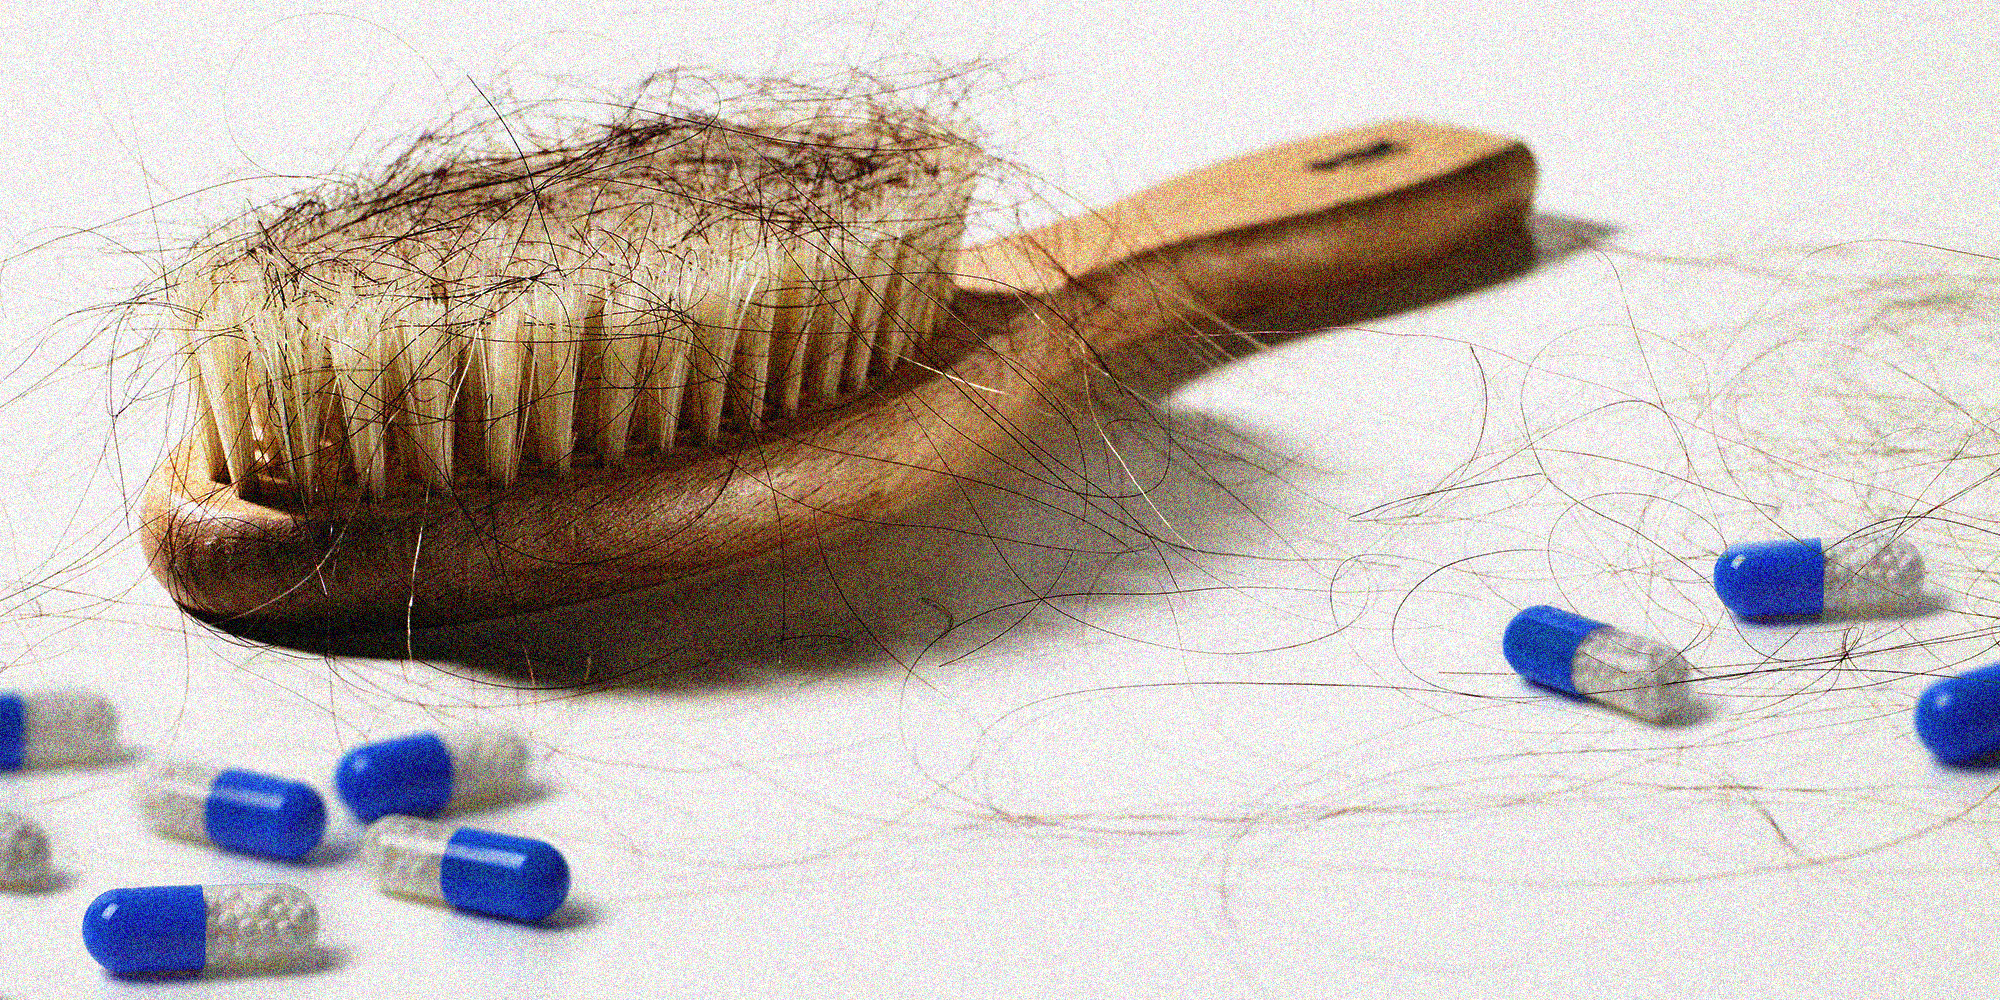 Biotin for Hair Growth - Does Biotin Really Work to Prevent Hair Loss